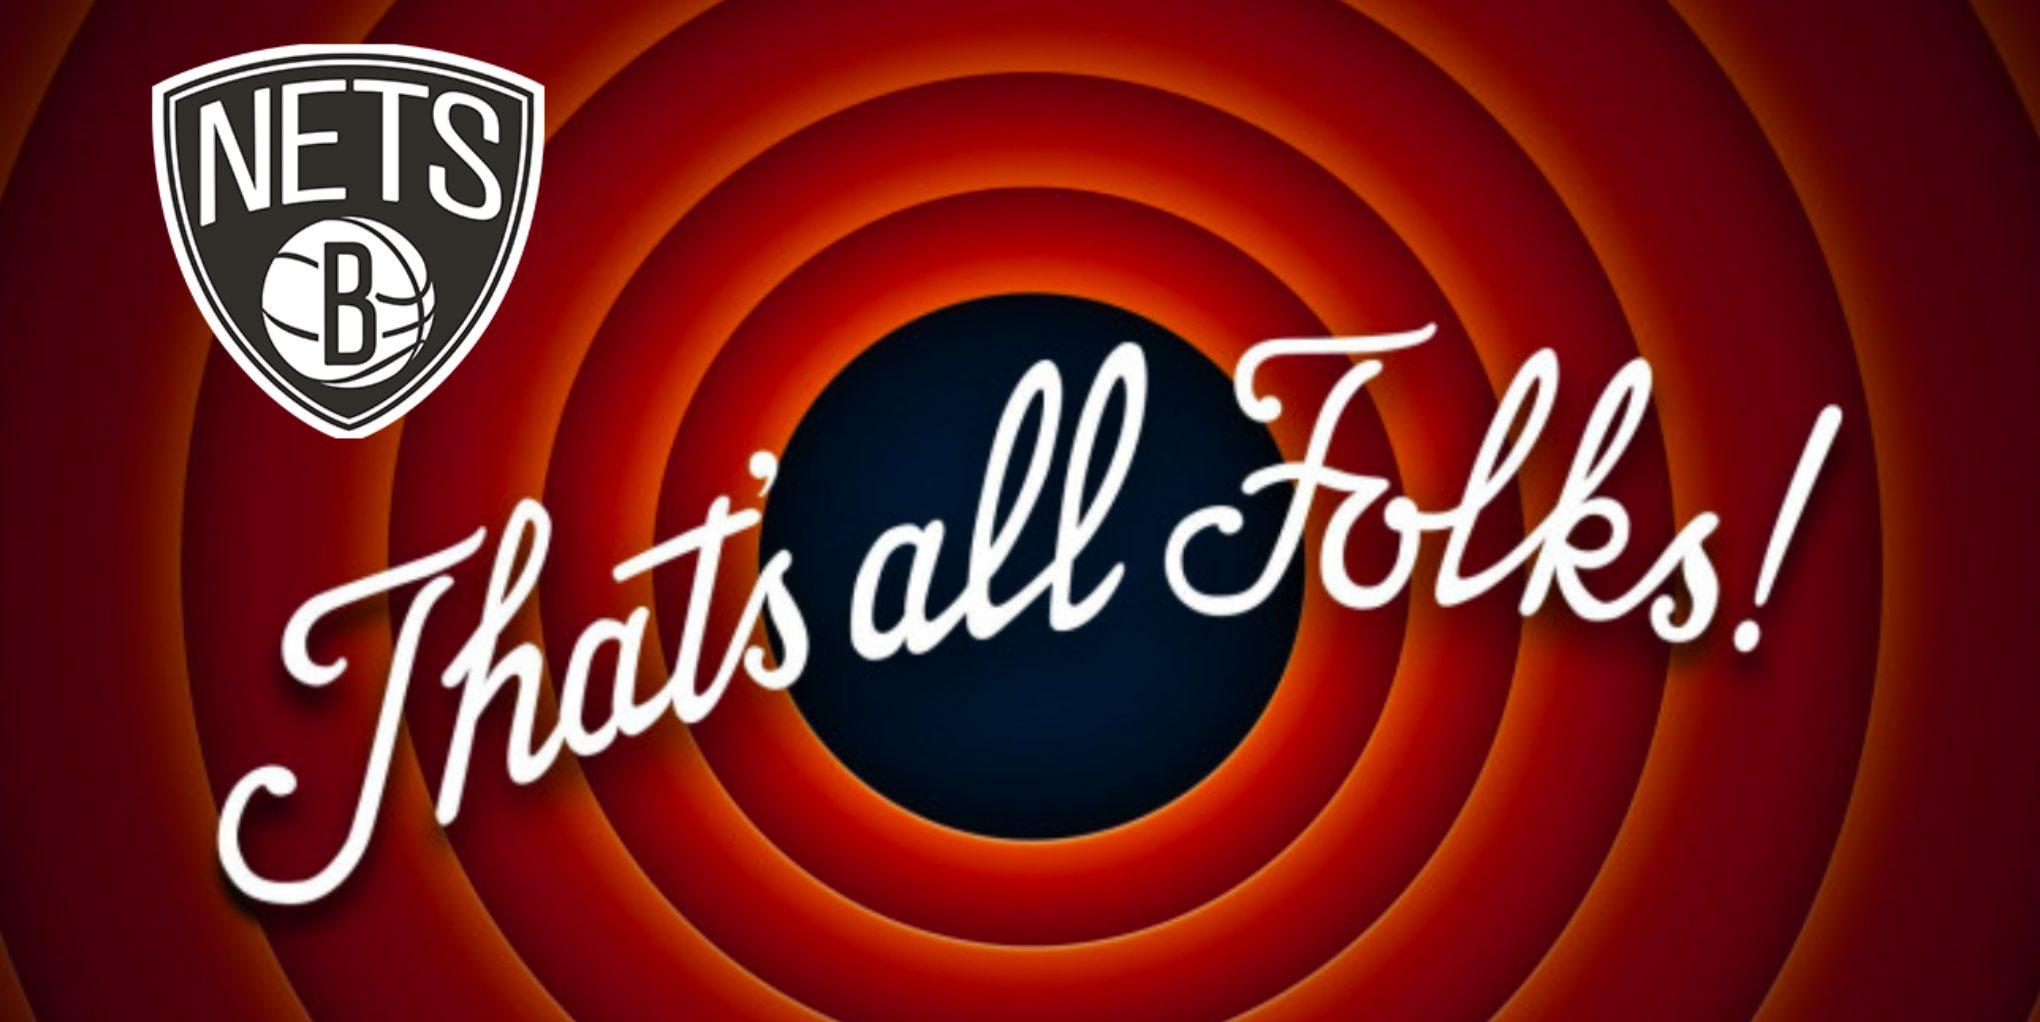 That's all folks Nets 9 février 2023